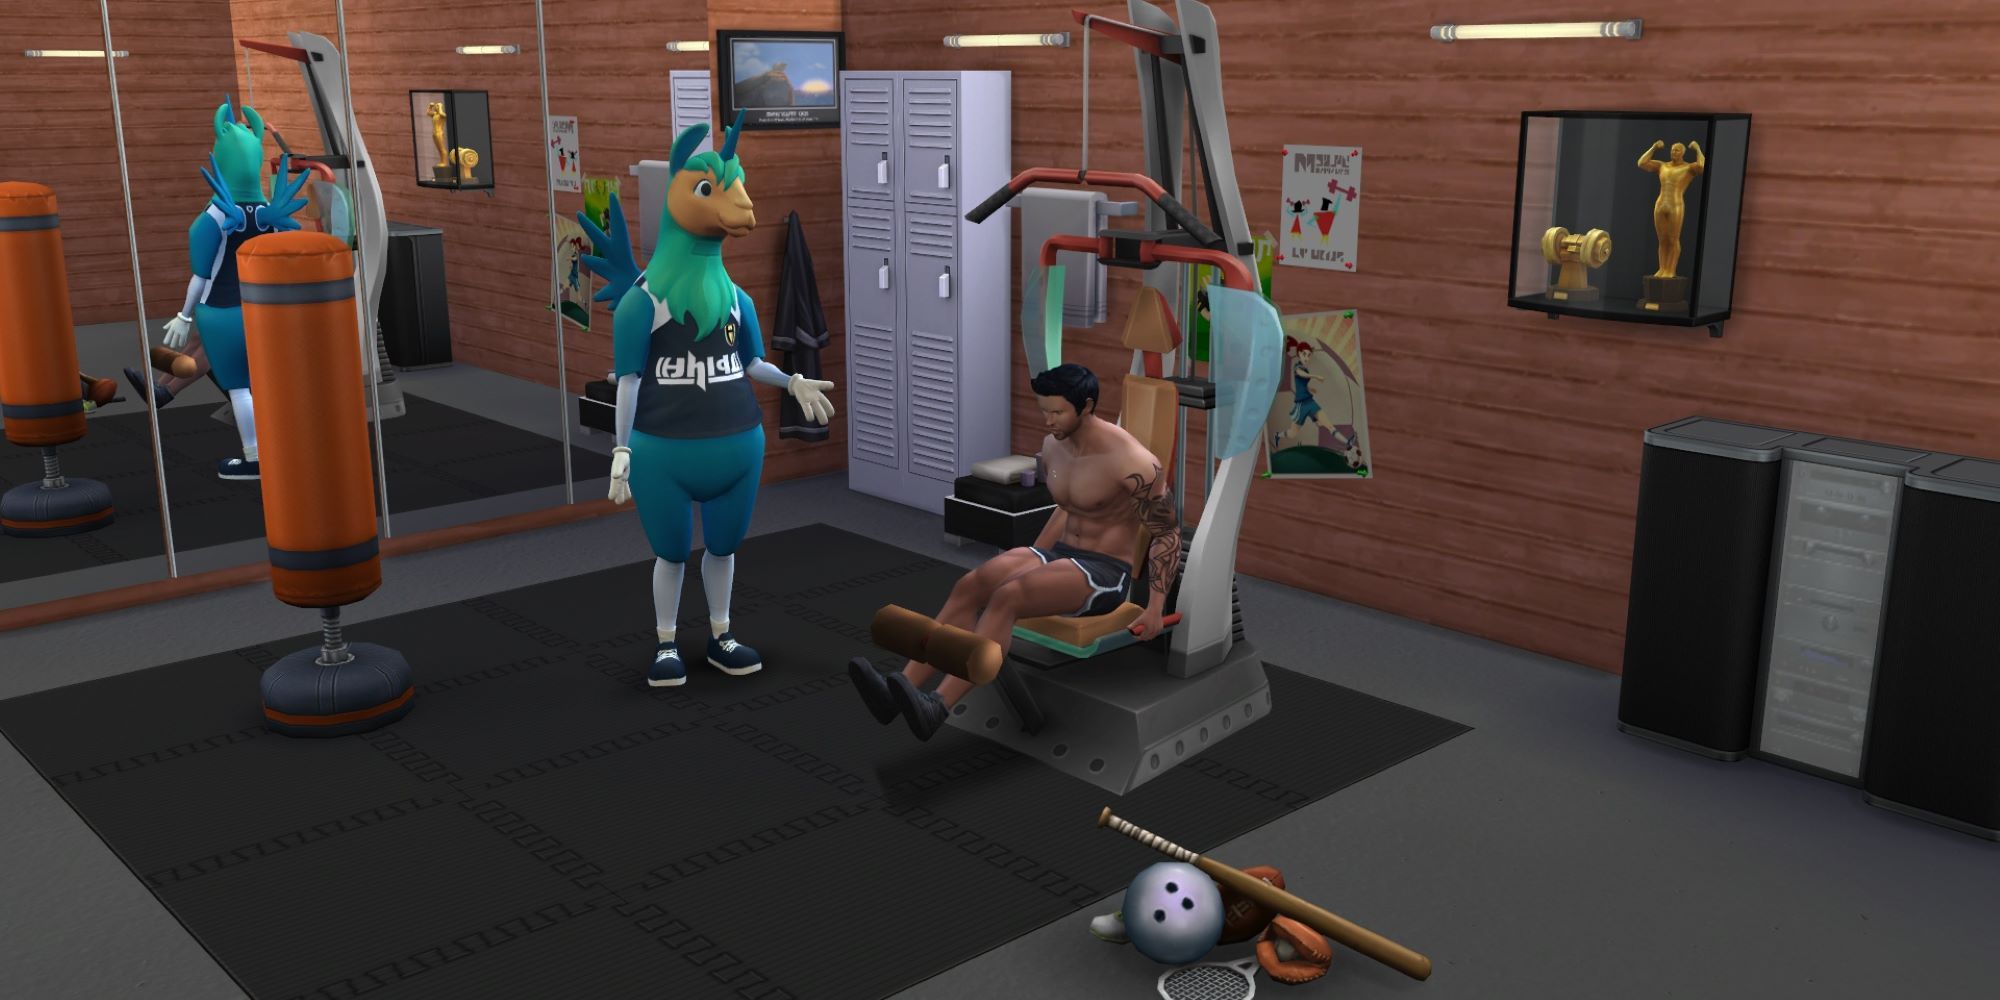 Screenshot of a gym in The Sims 4, with a Sim working out.